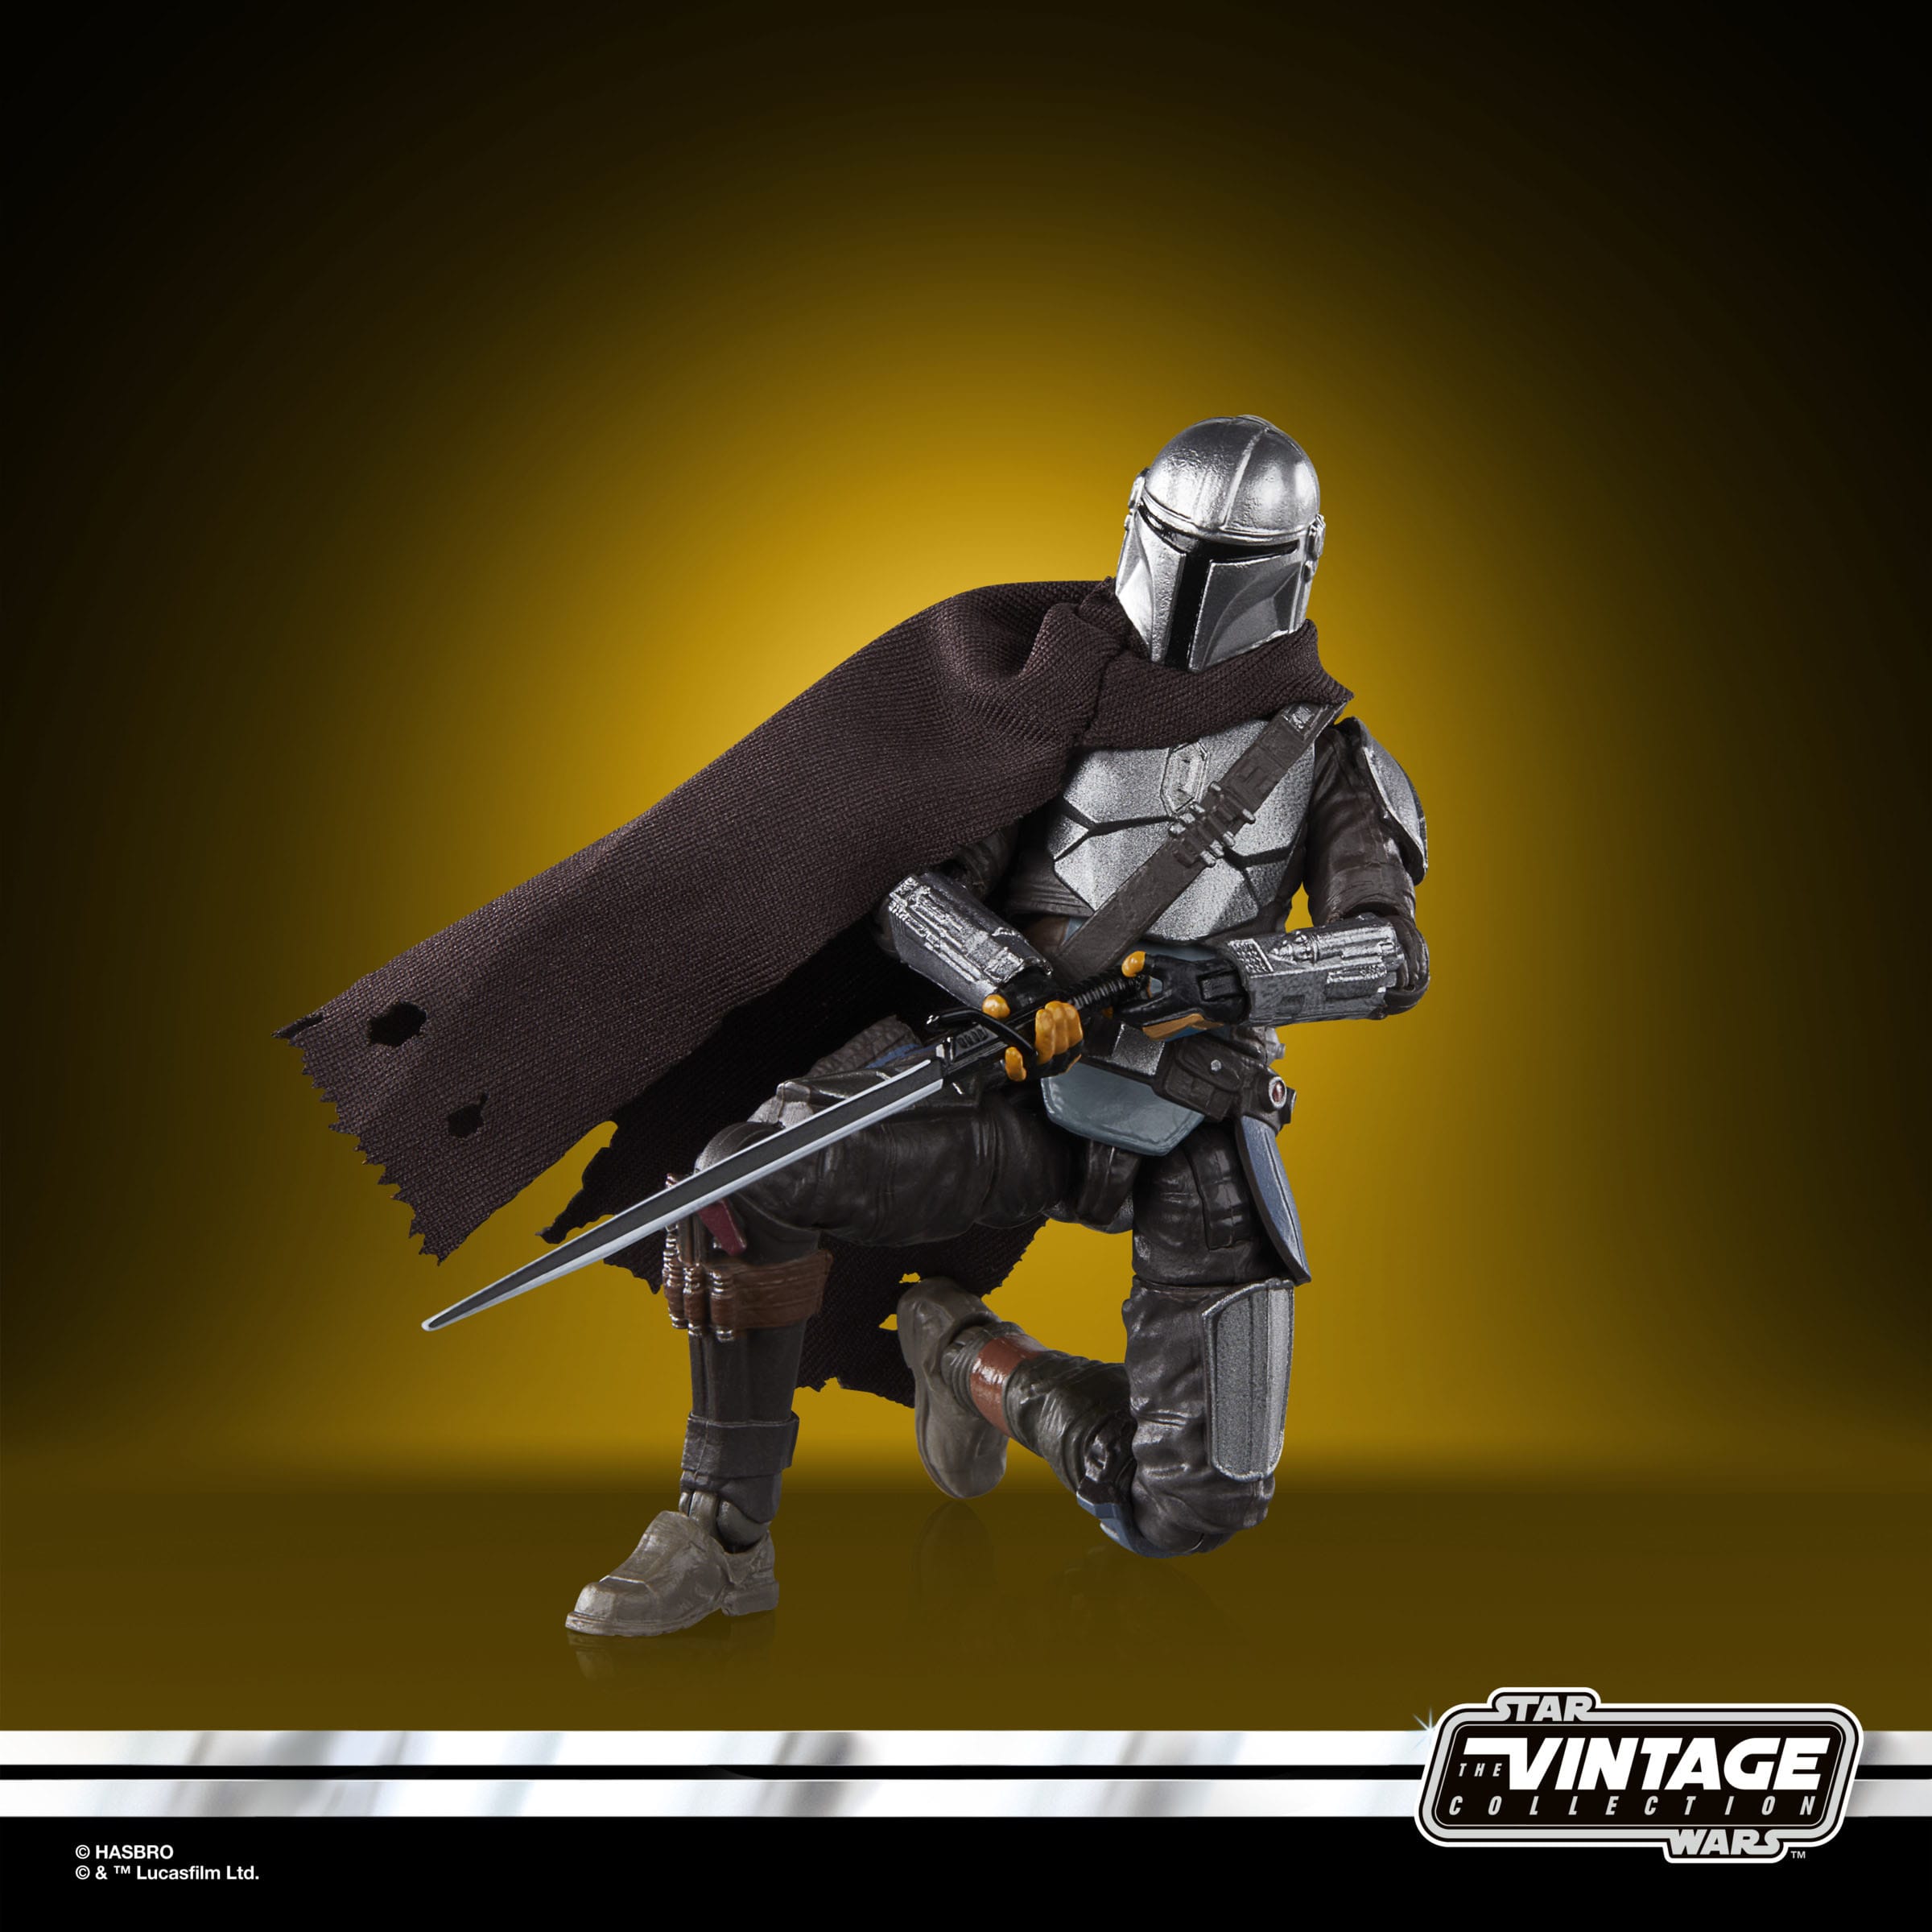 Star Wars: The Mandalorian Vintage Collection Actionfigur The Mandalorian (Mines of Mandalore) 10 cm HASF9780 5010996203298